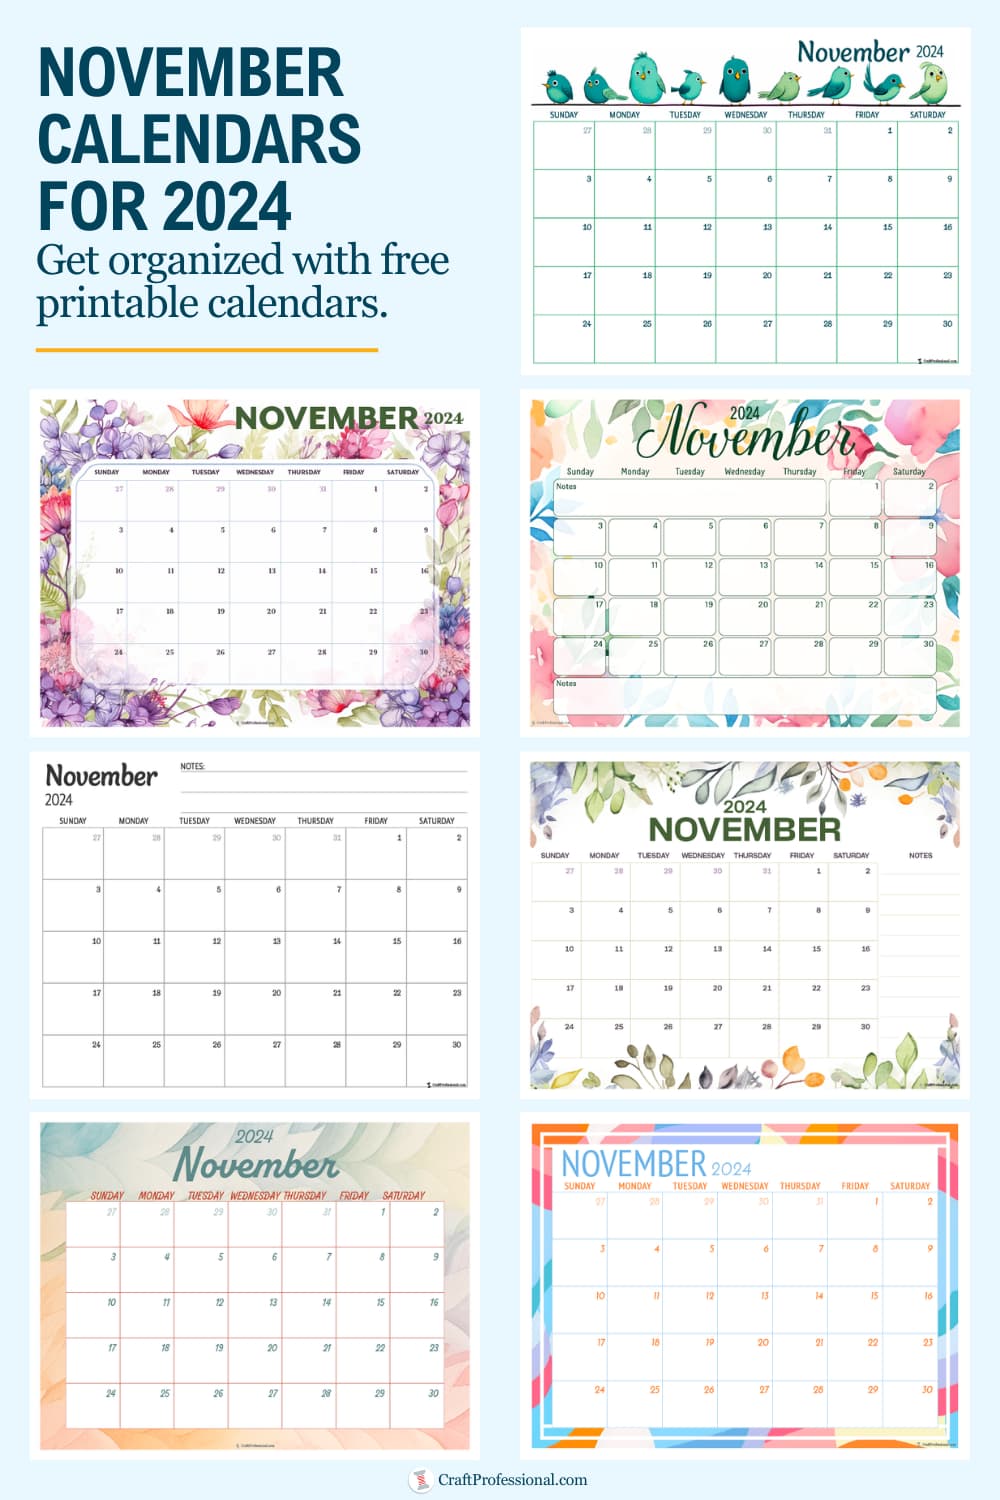 Collage of printable calendars. Text - November calendars for 2024. Get organized with free printable calendars.